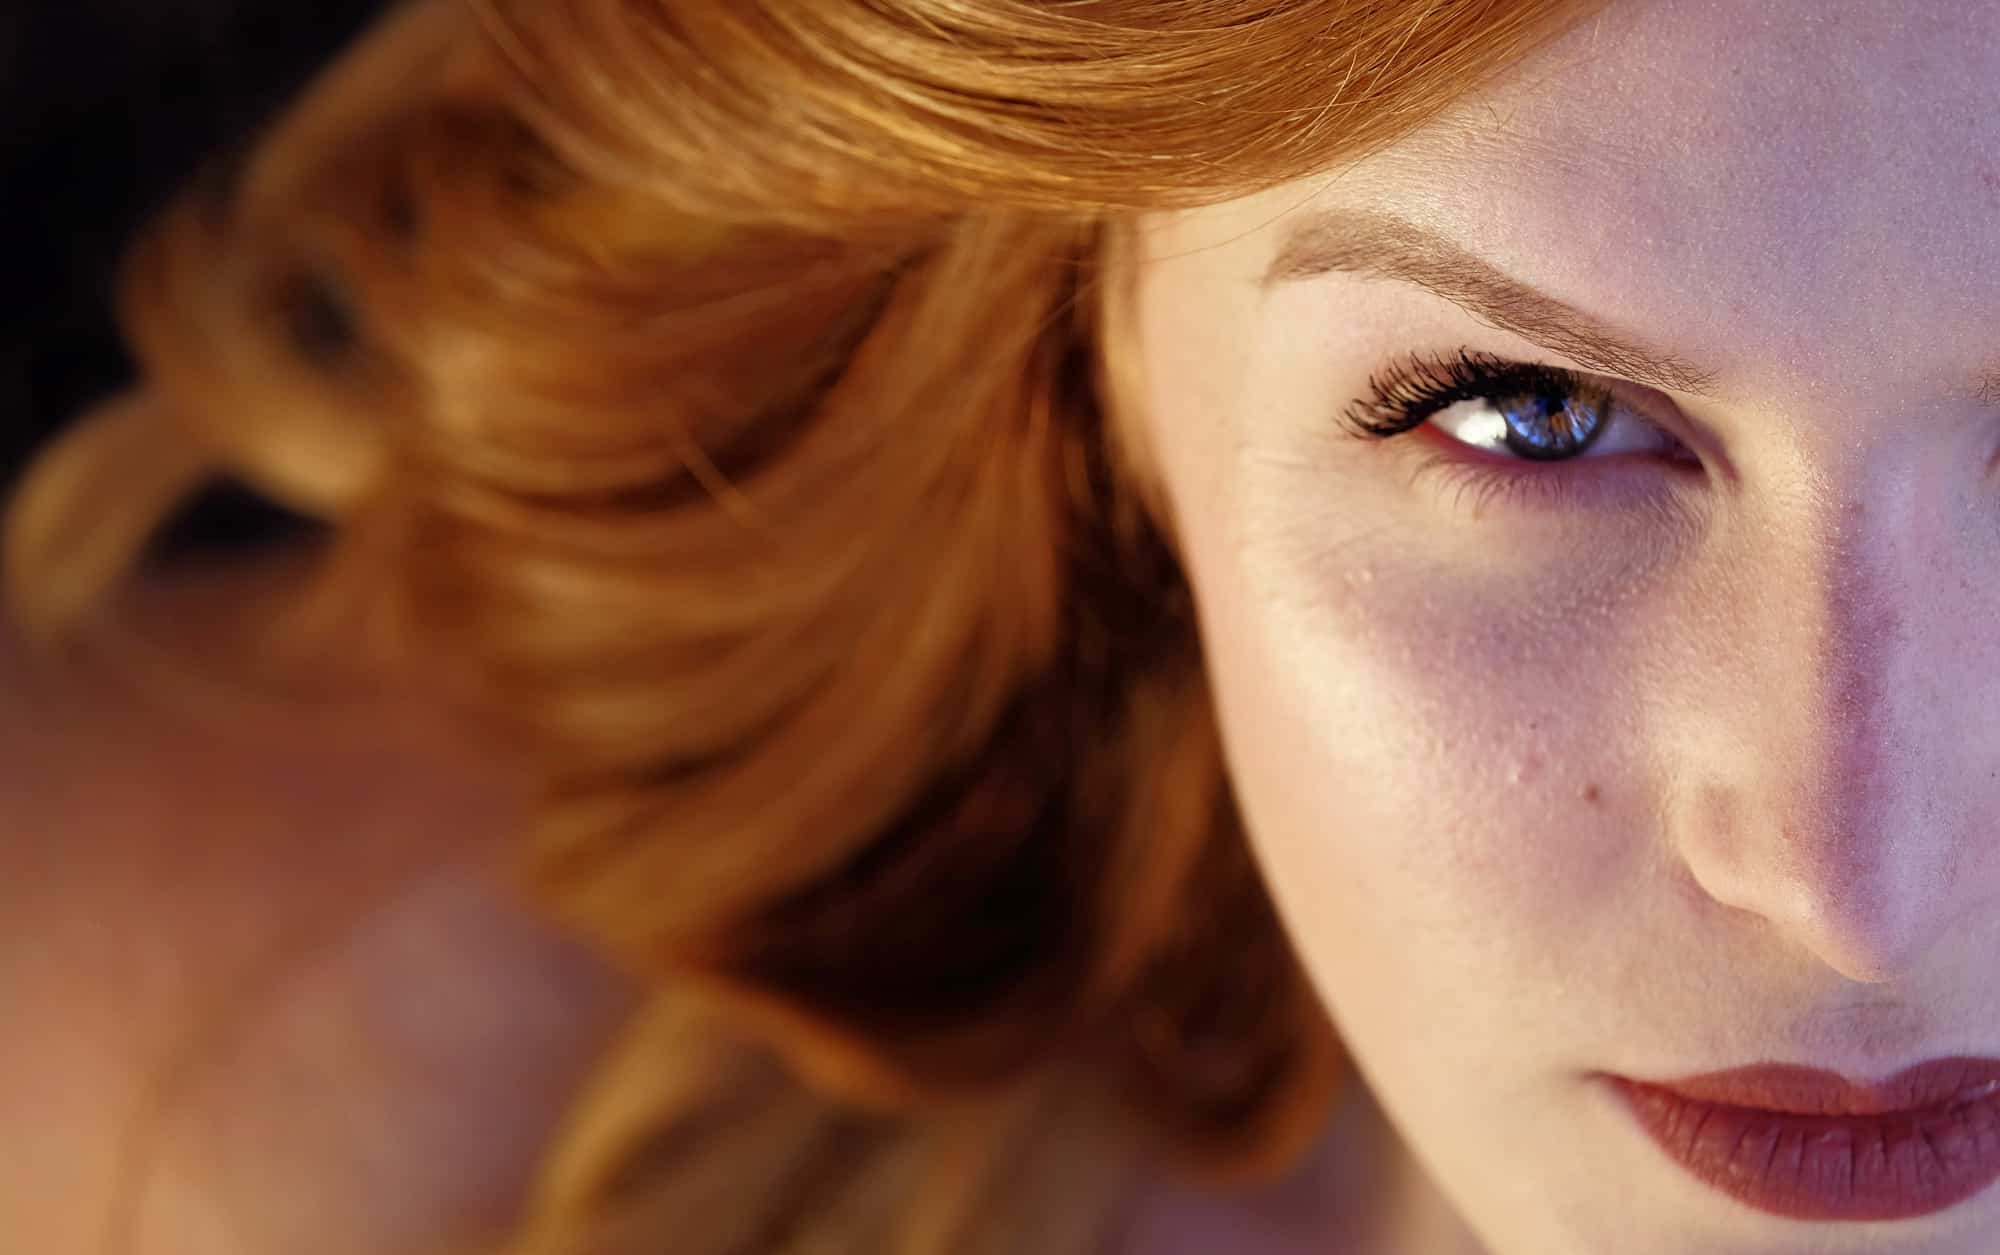 Woman with ginger hair staring enigmatically at camera